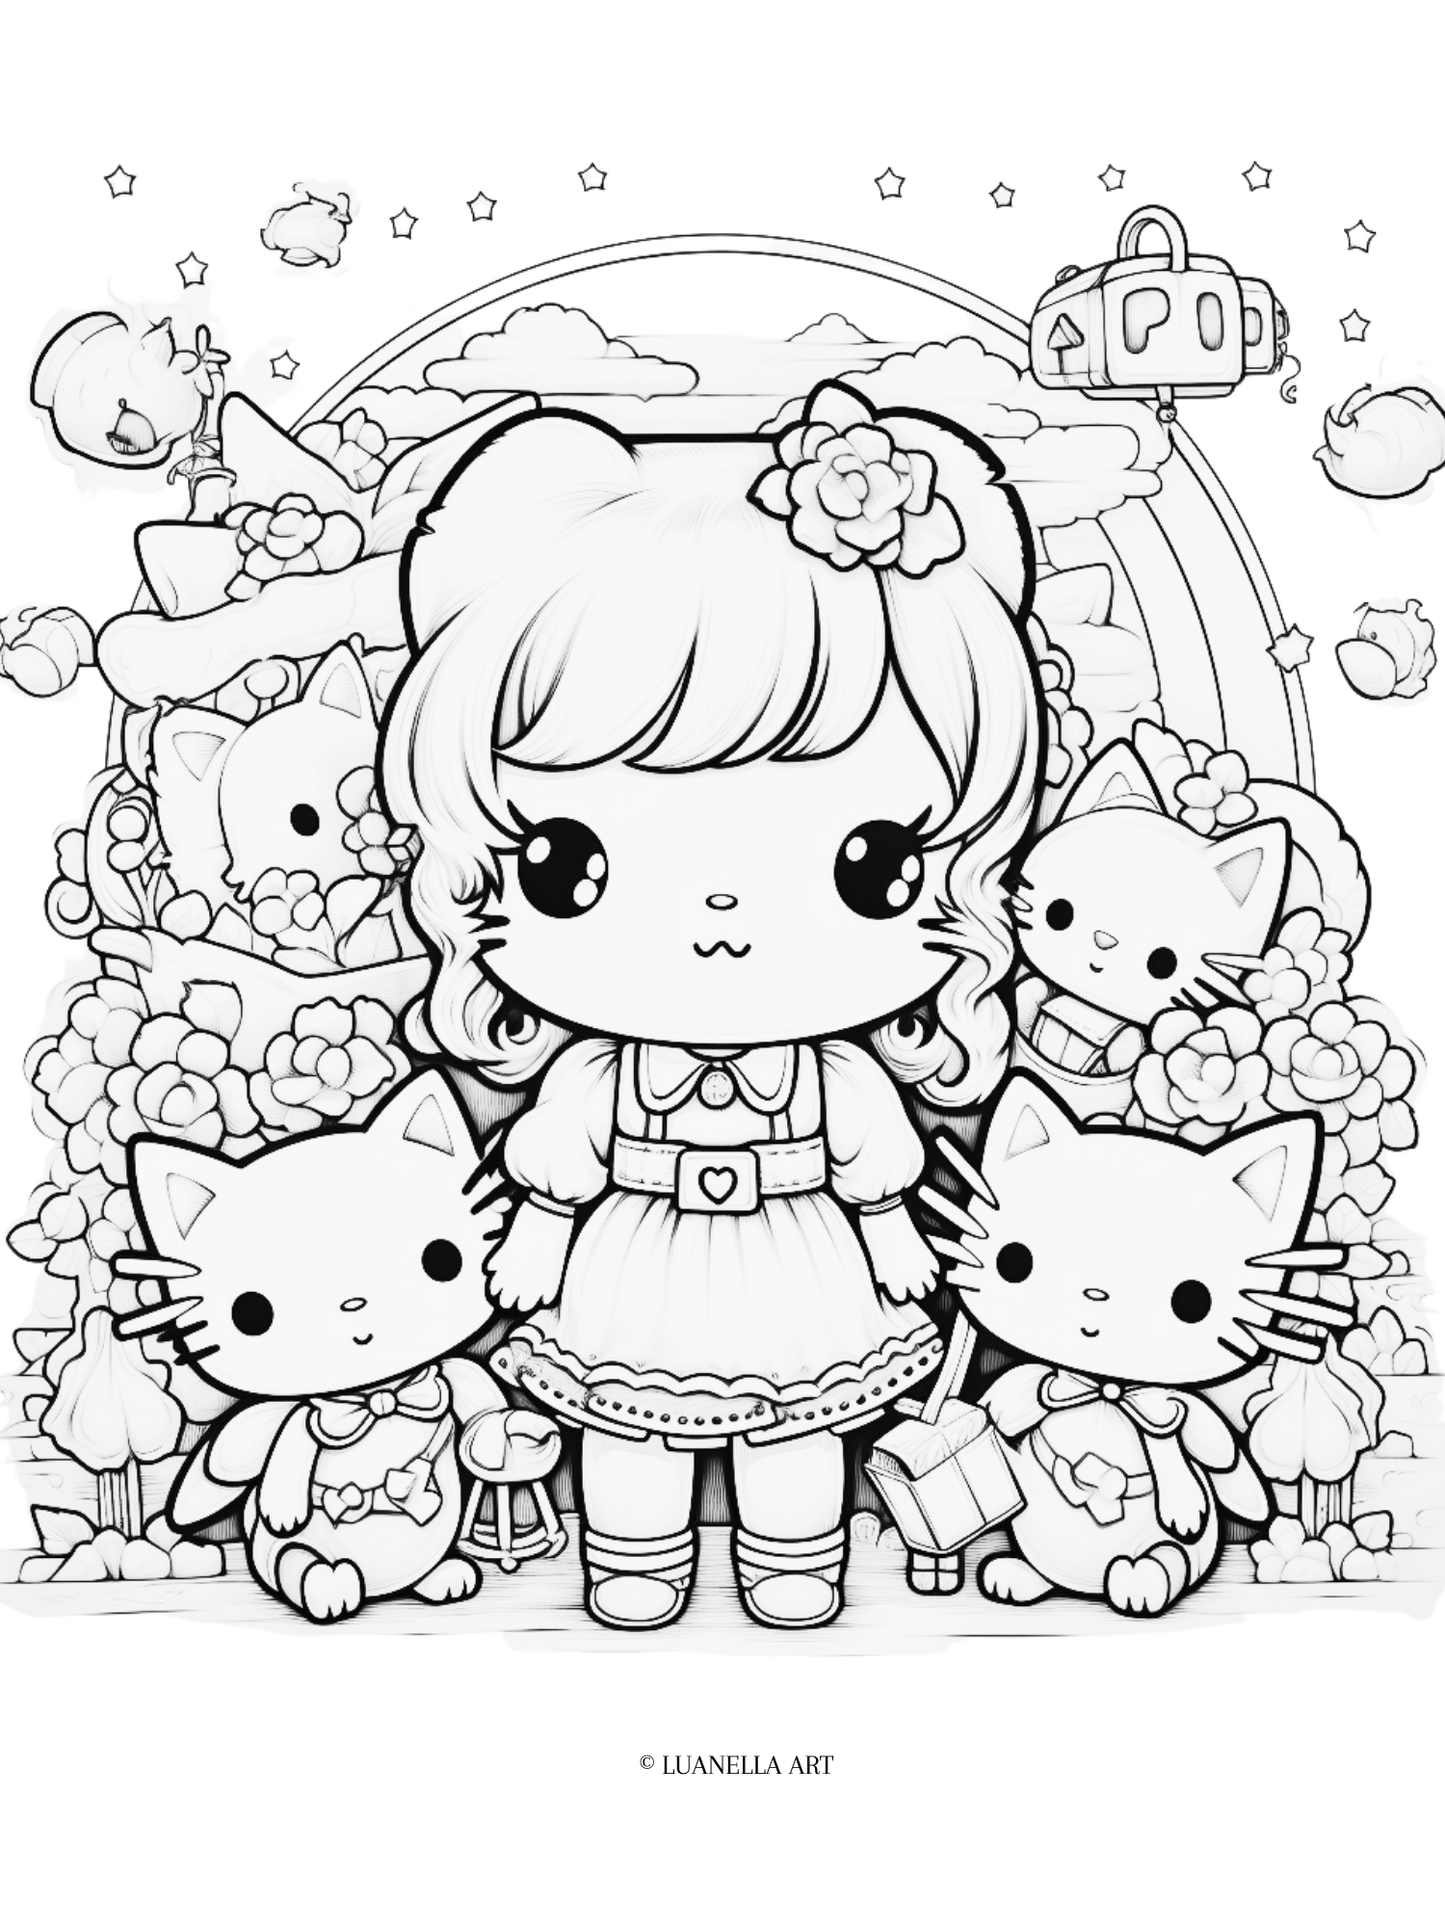 Sanrio, My Melody and friends Coloring Page | Instant Digital Download